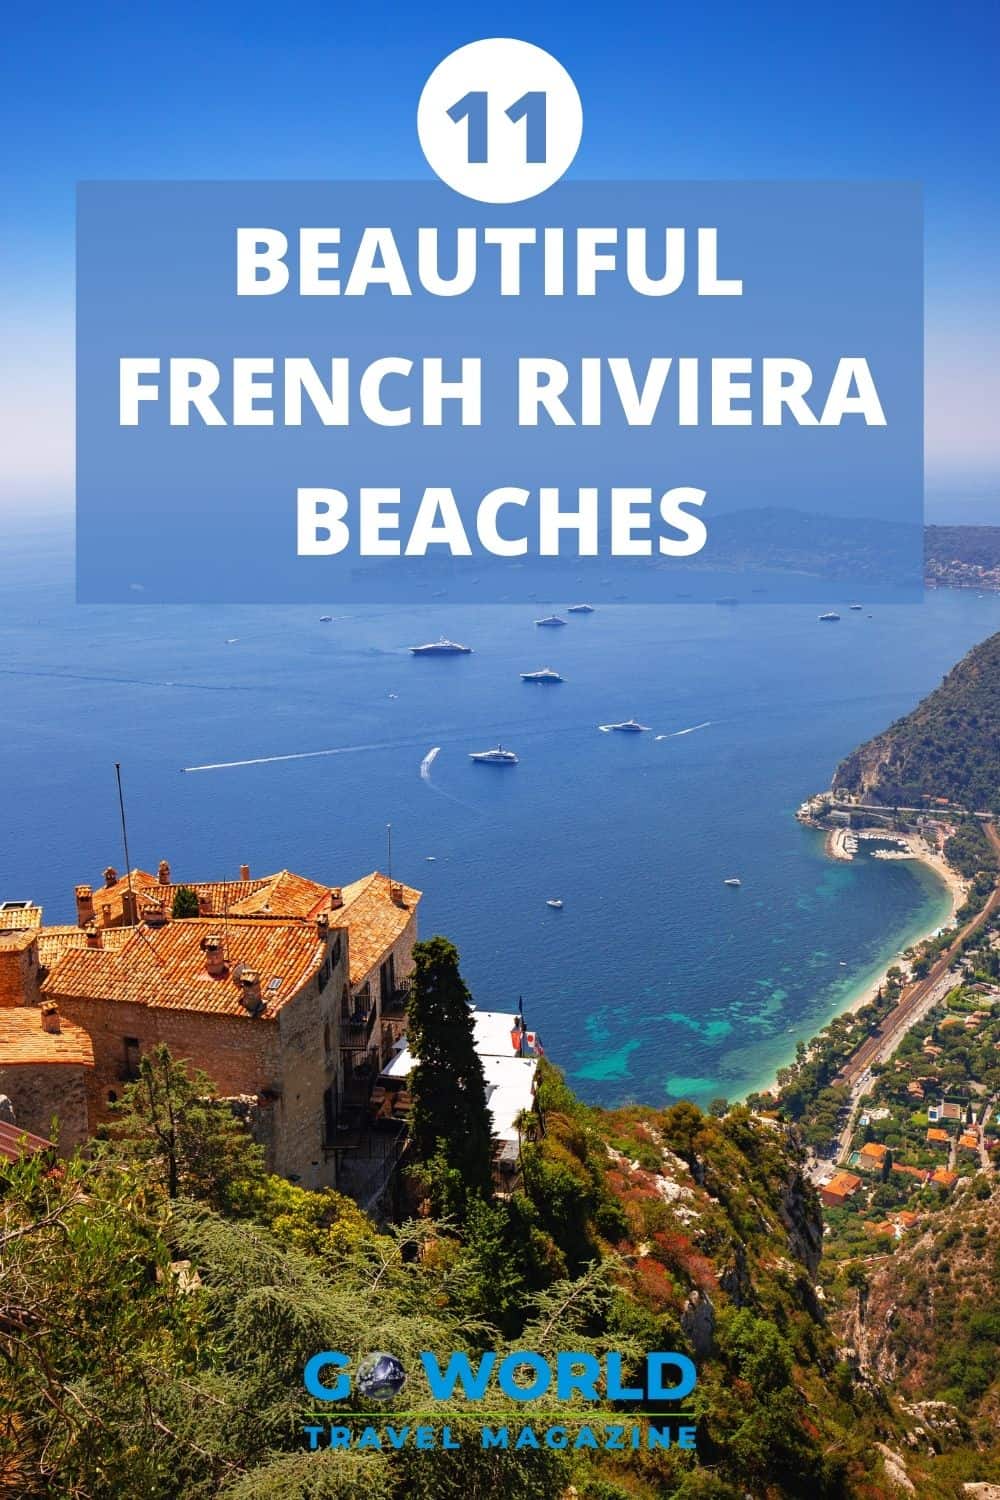 French Riviera Beaches are beautiful and diverse. These gorgeous beaches on the Cote d'Azur will have you dreaming of a French coast vacation. #Frenchriviera #SouthernFrance #Frenchcoast #Frenchrivierabeaches